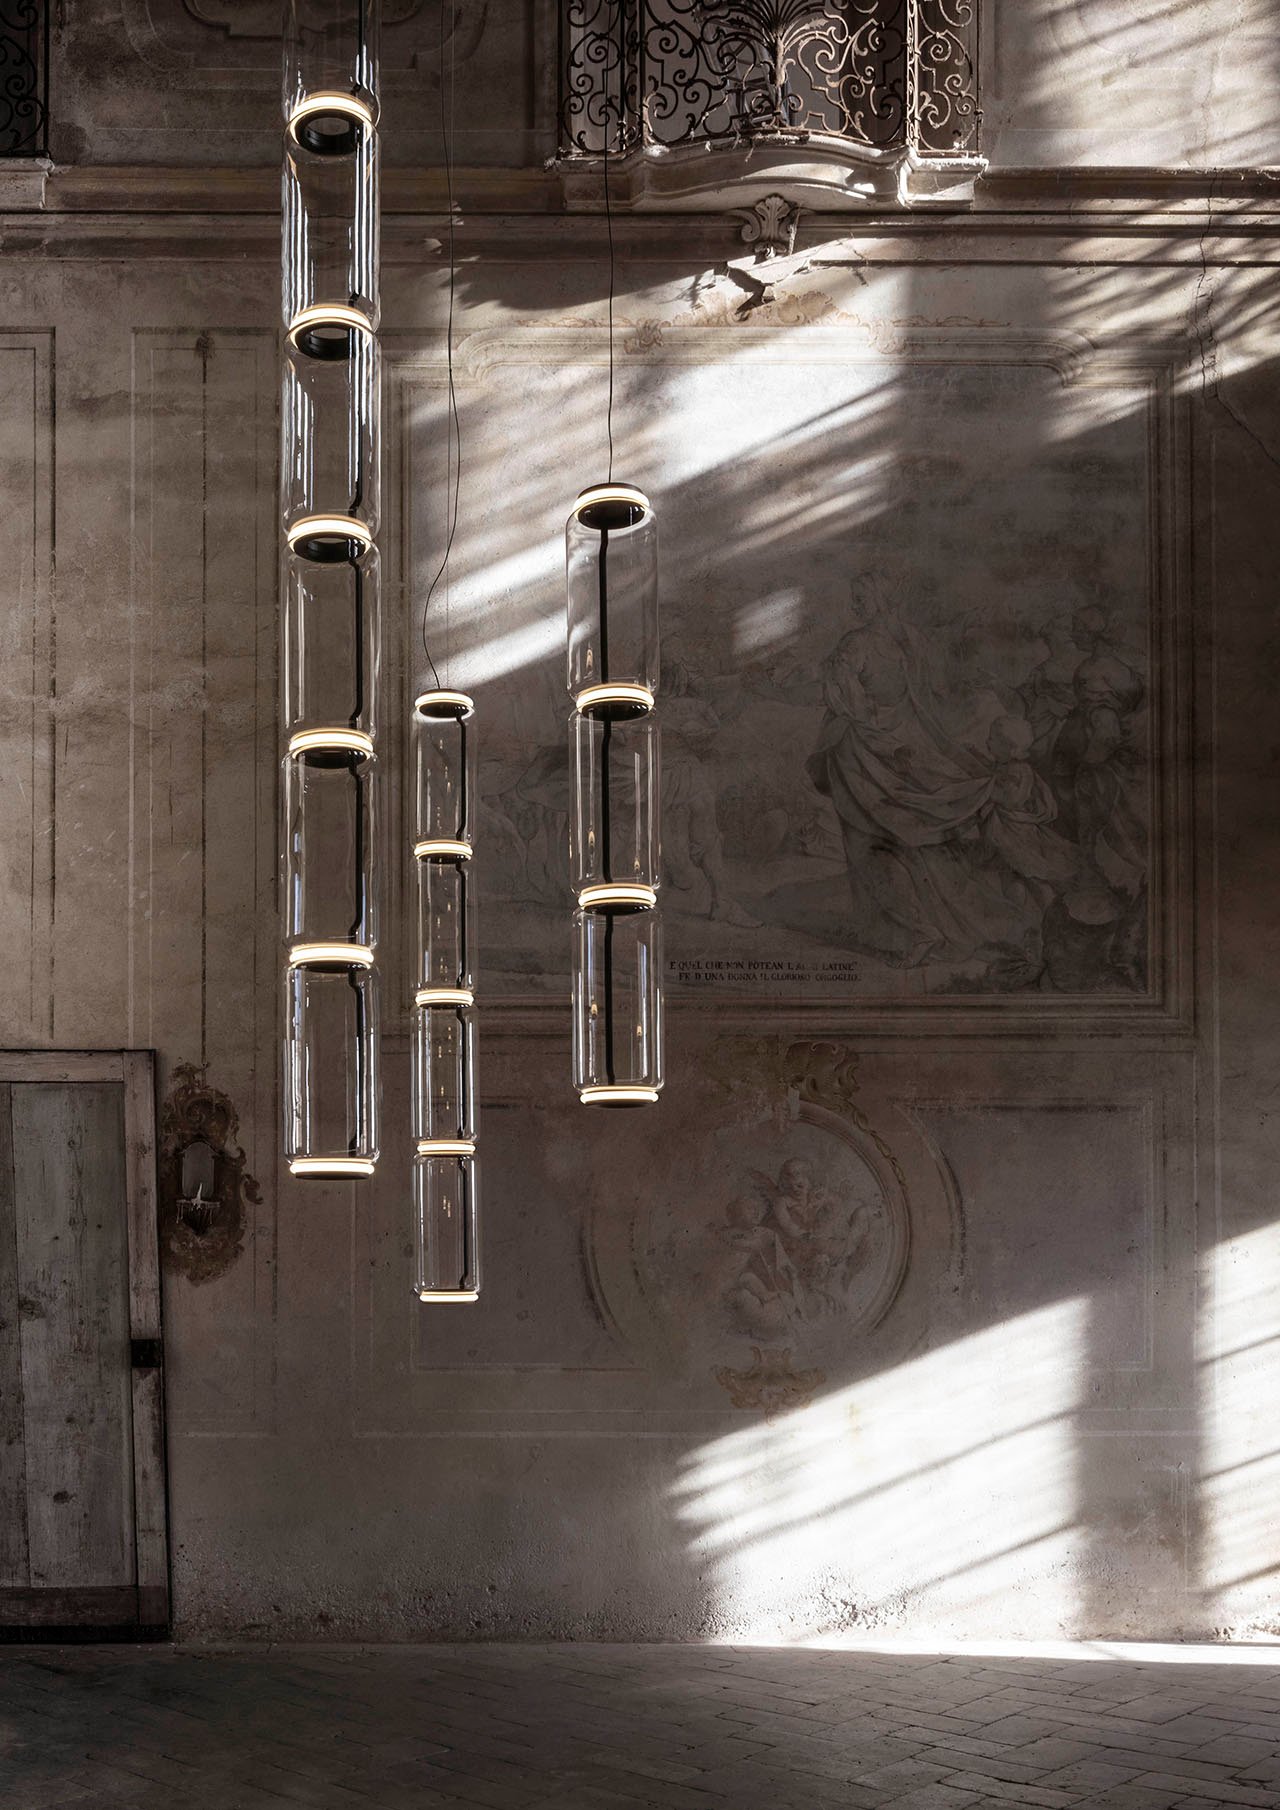 Noctambule collection of blown glass lamps by Konstantin Grcic for FLOS.photo by Santi Caleca.